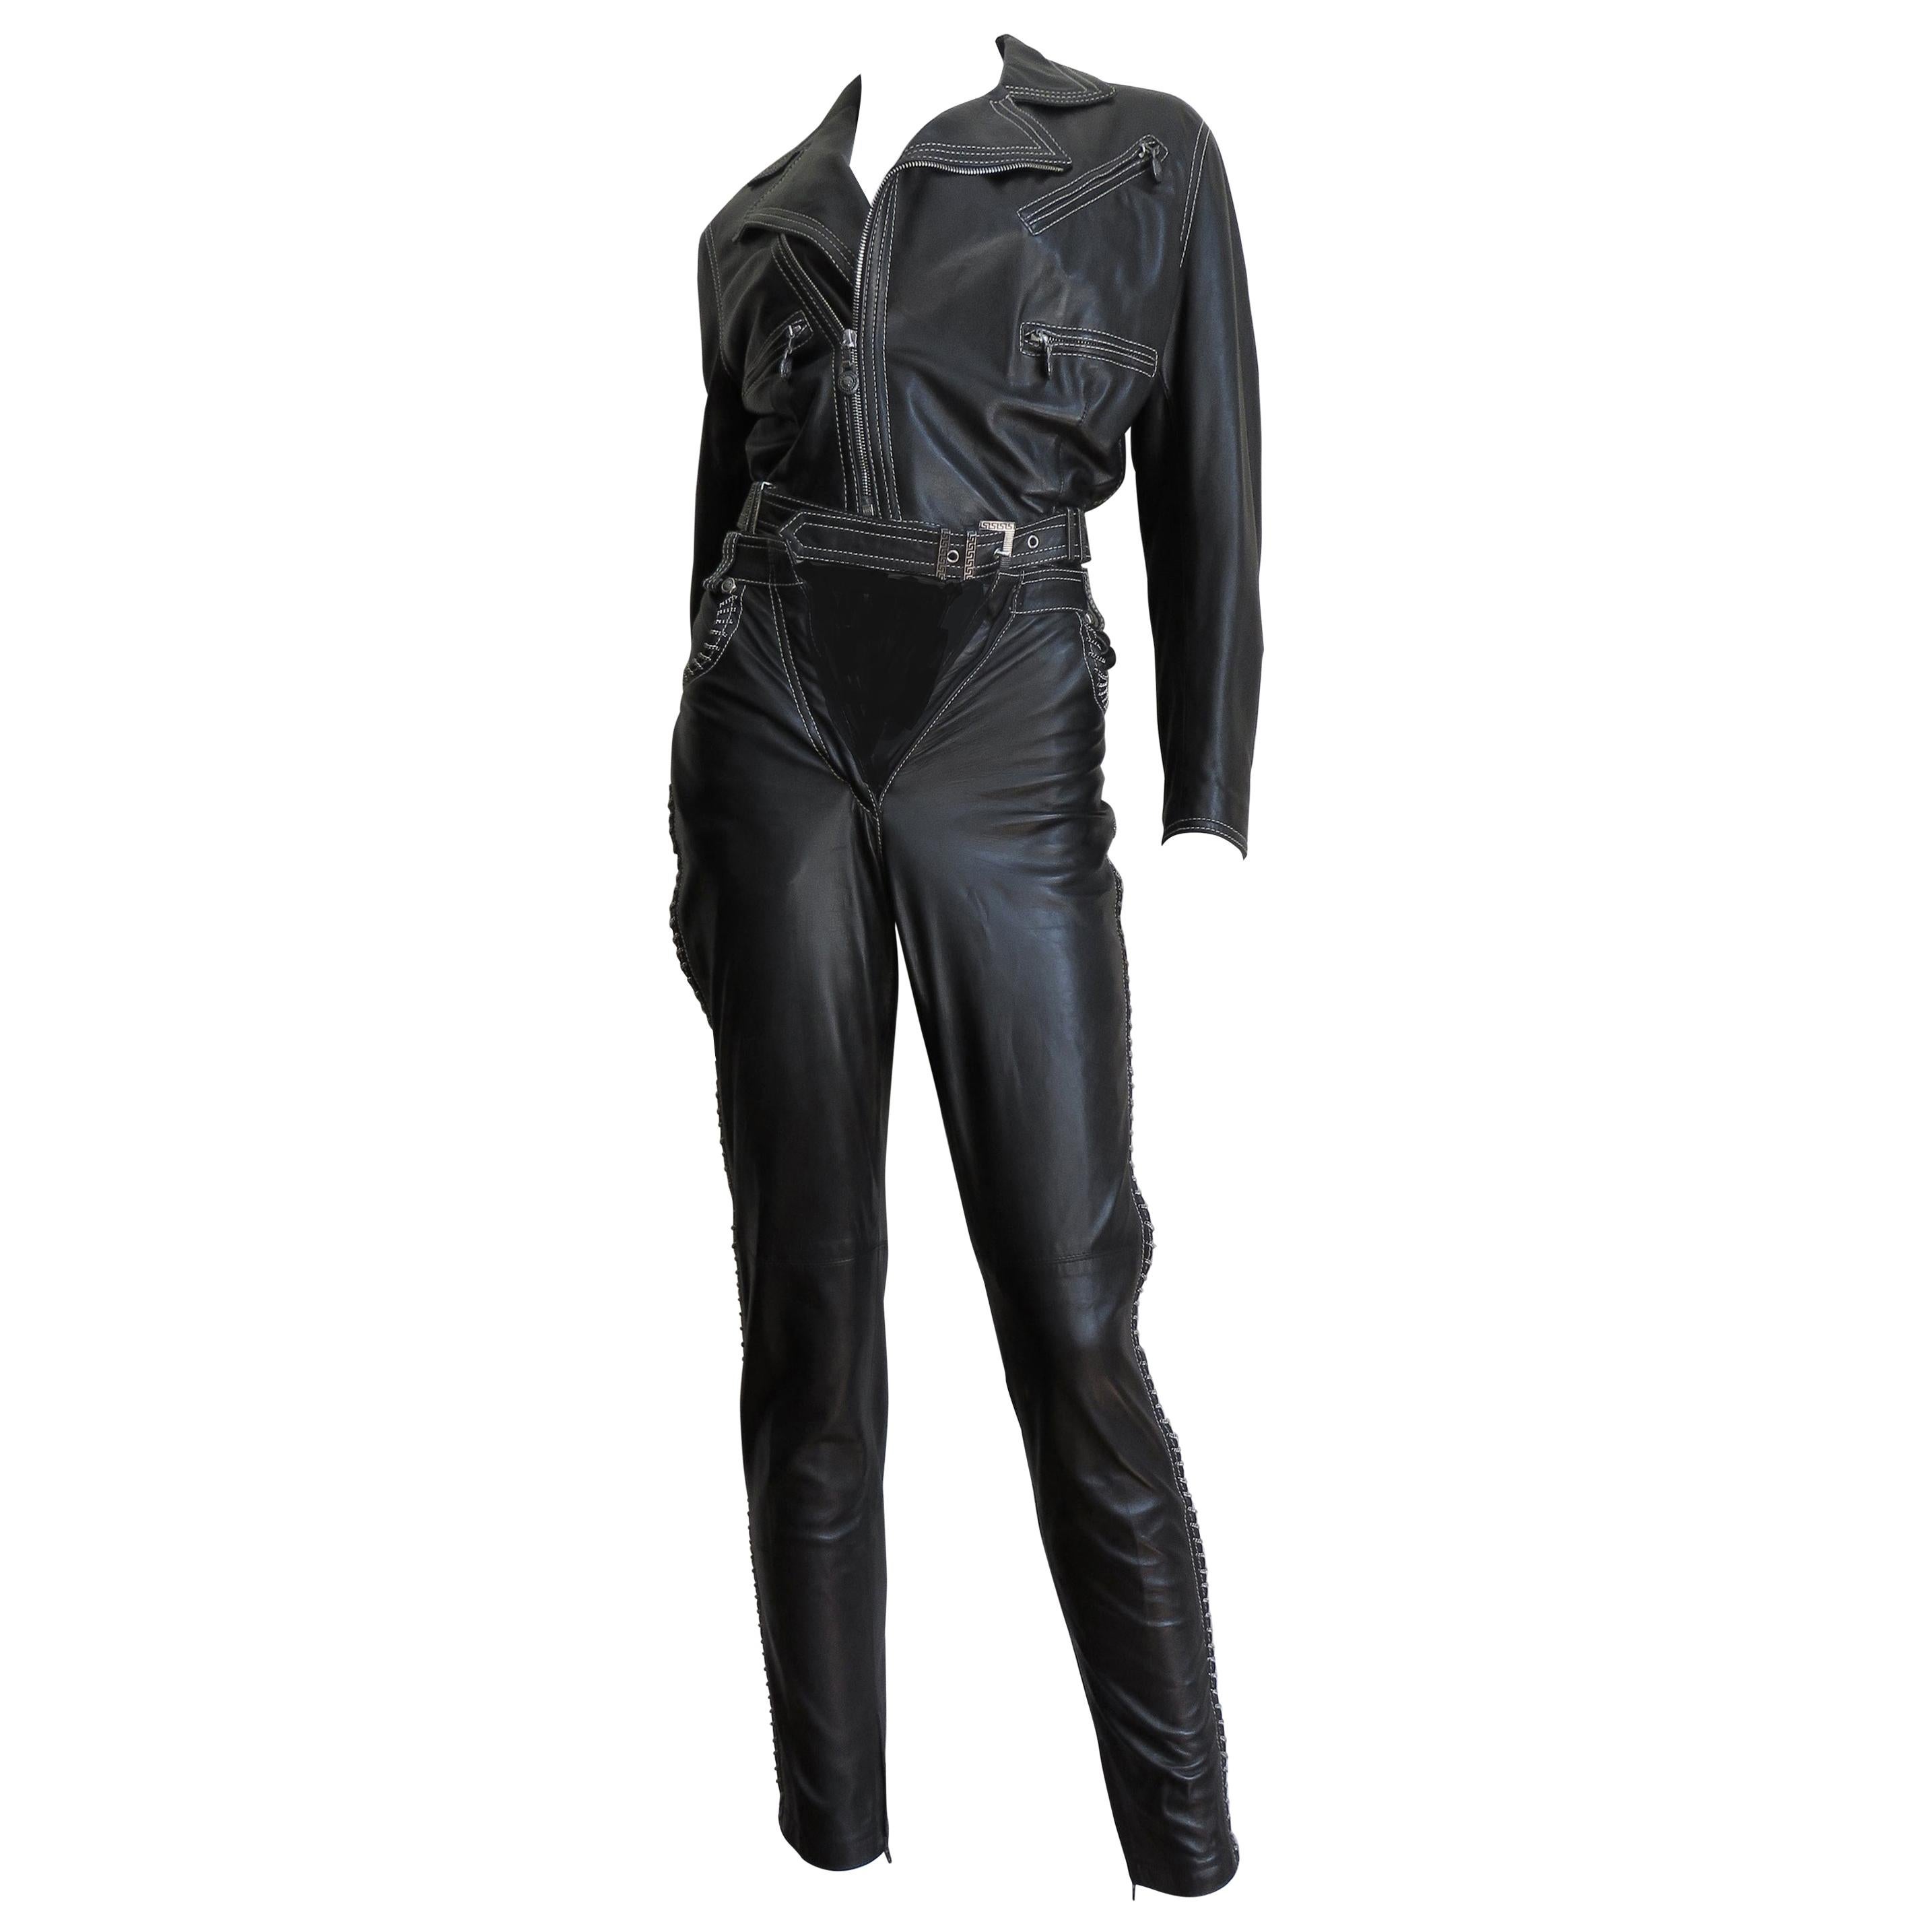  Gianni Versace A/W 1992 Leather Motorcycle Jacket and Pants With Chain Trim  For Sale